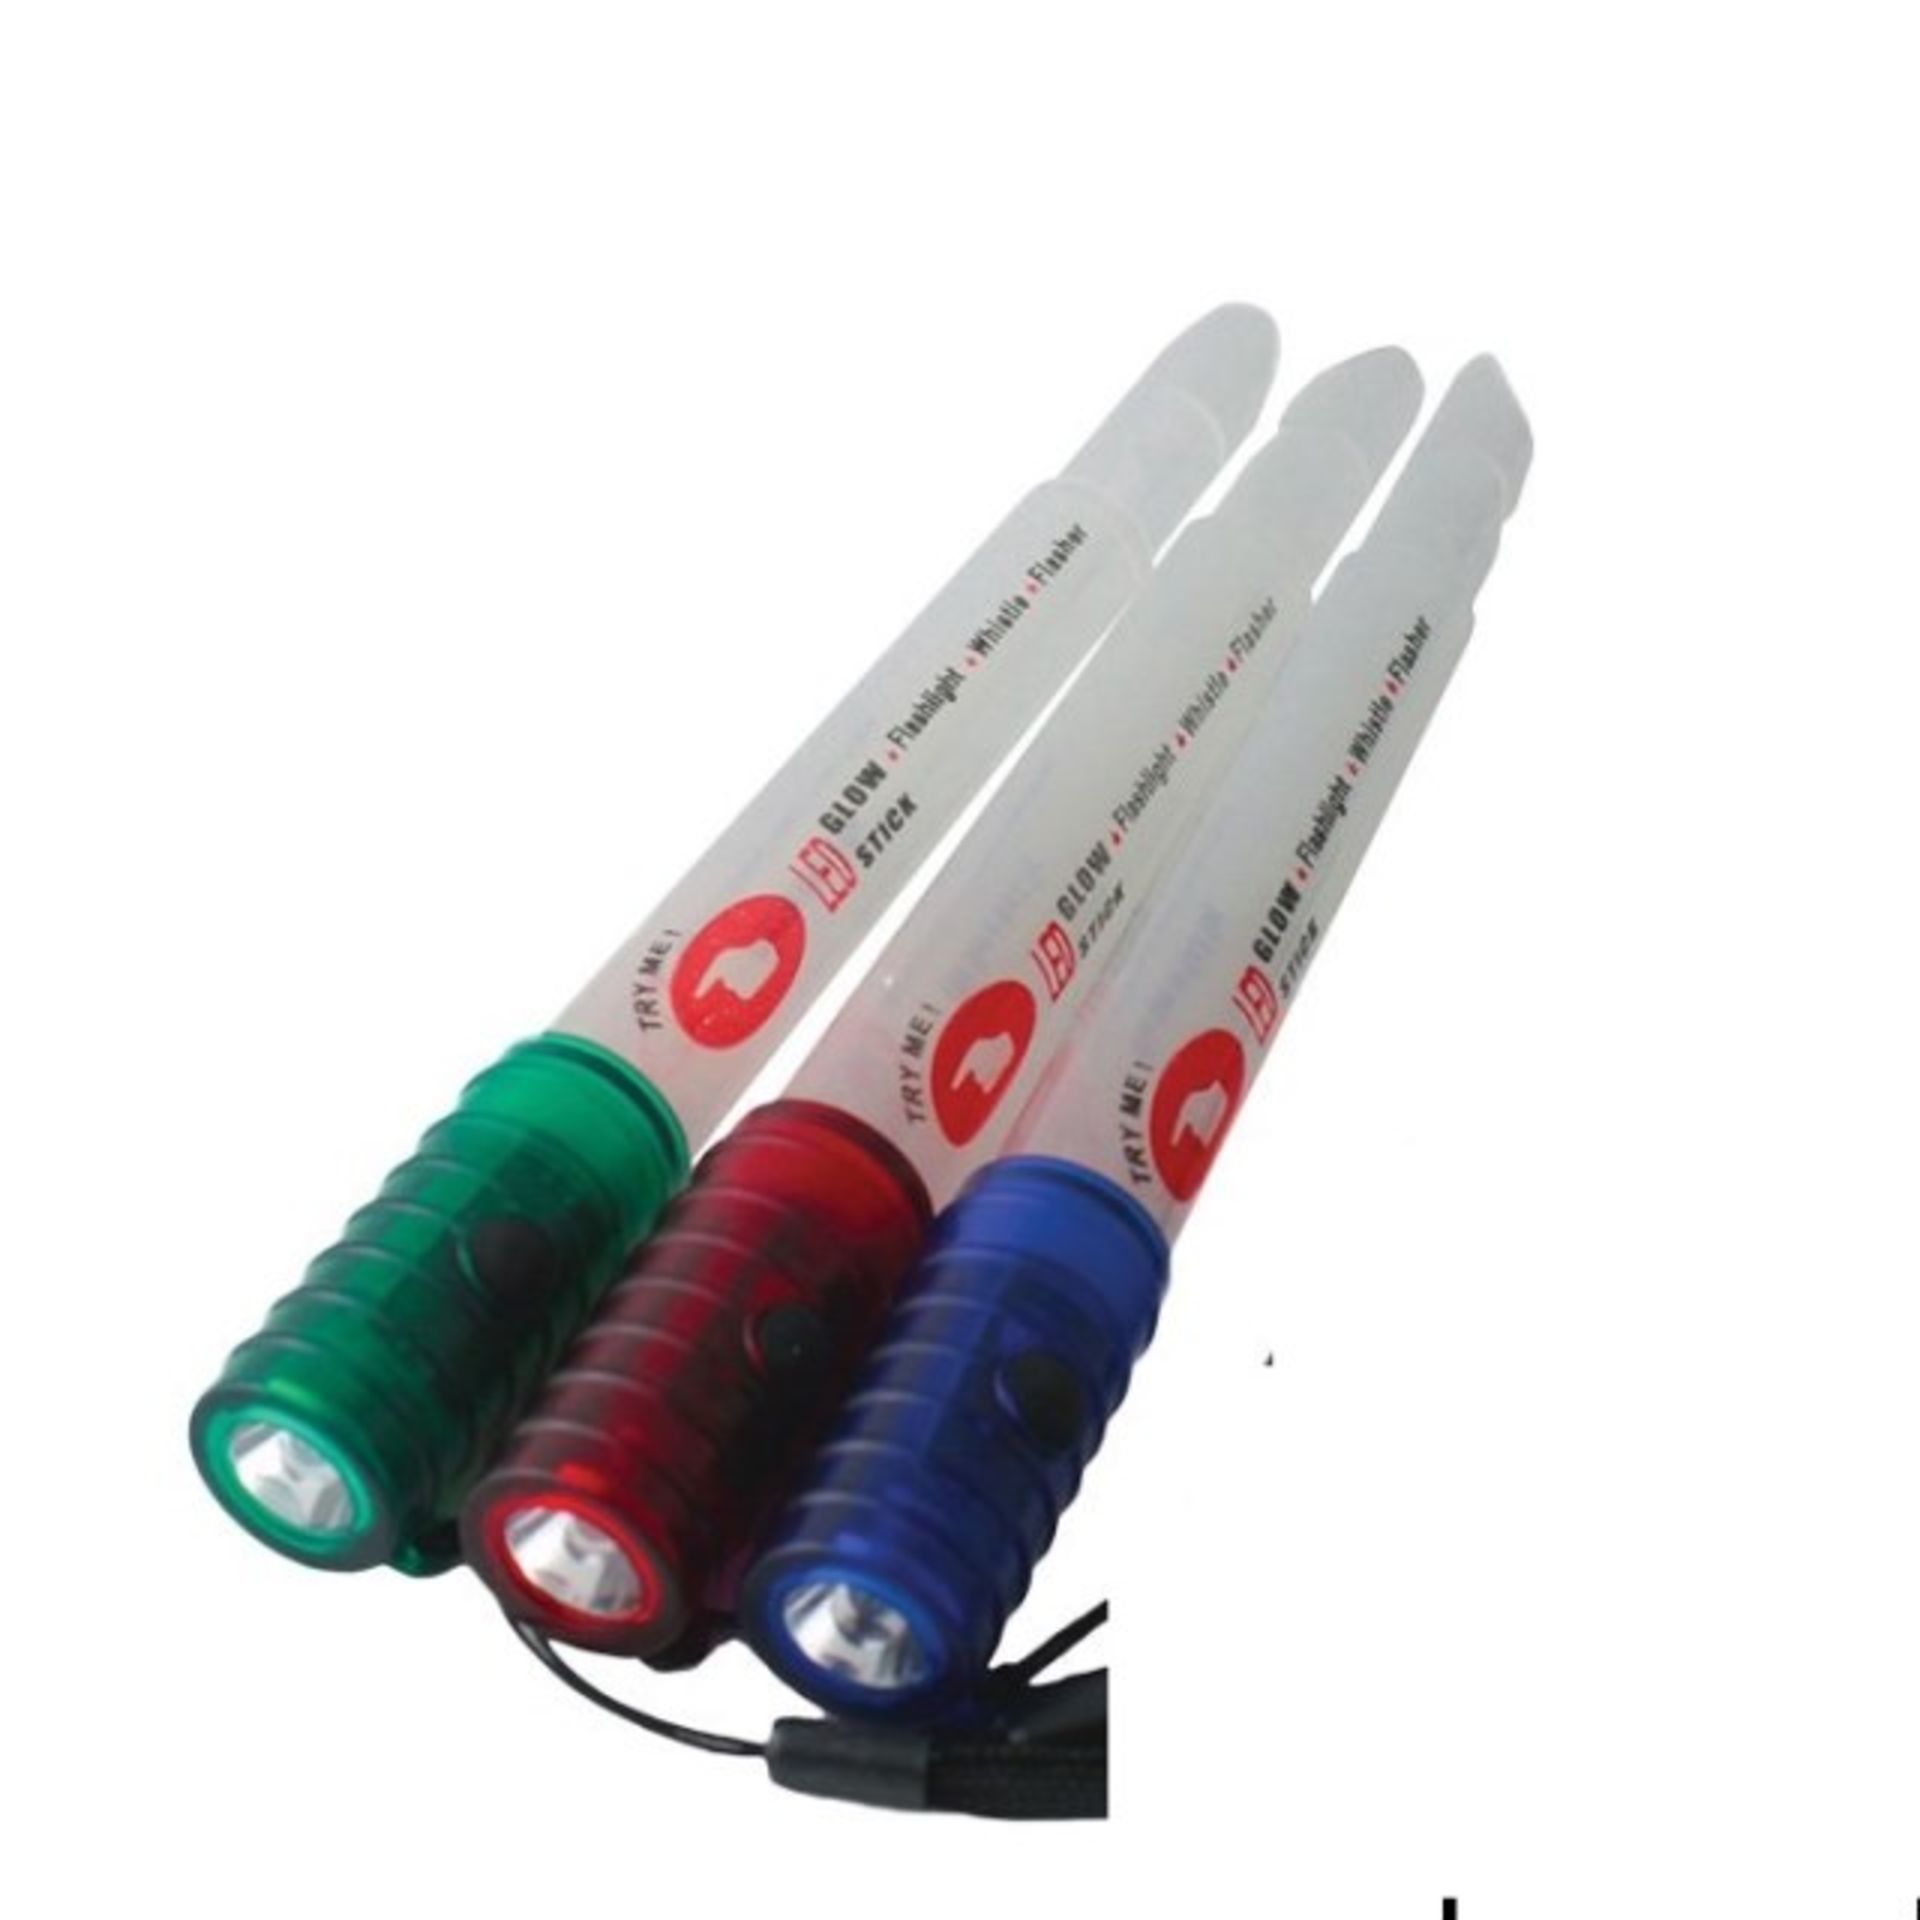 V Brand New Three LED Glowstick Torches With Emergency Whistle and 3 Light Settings Includes - Image 3 of 4